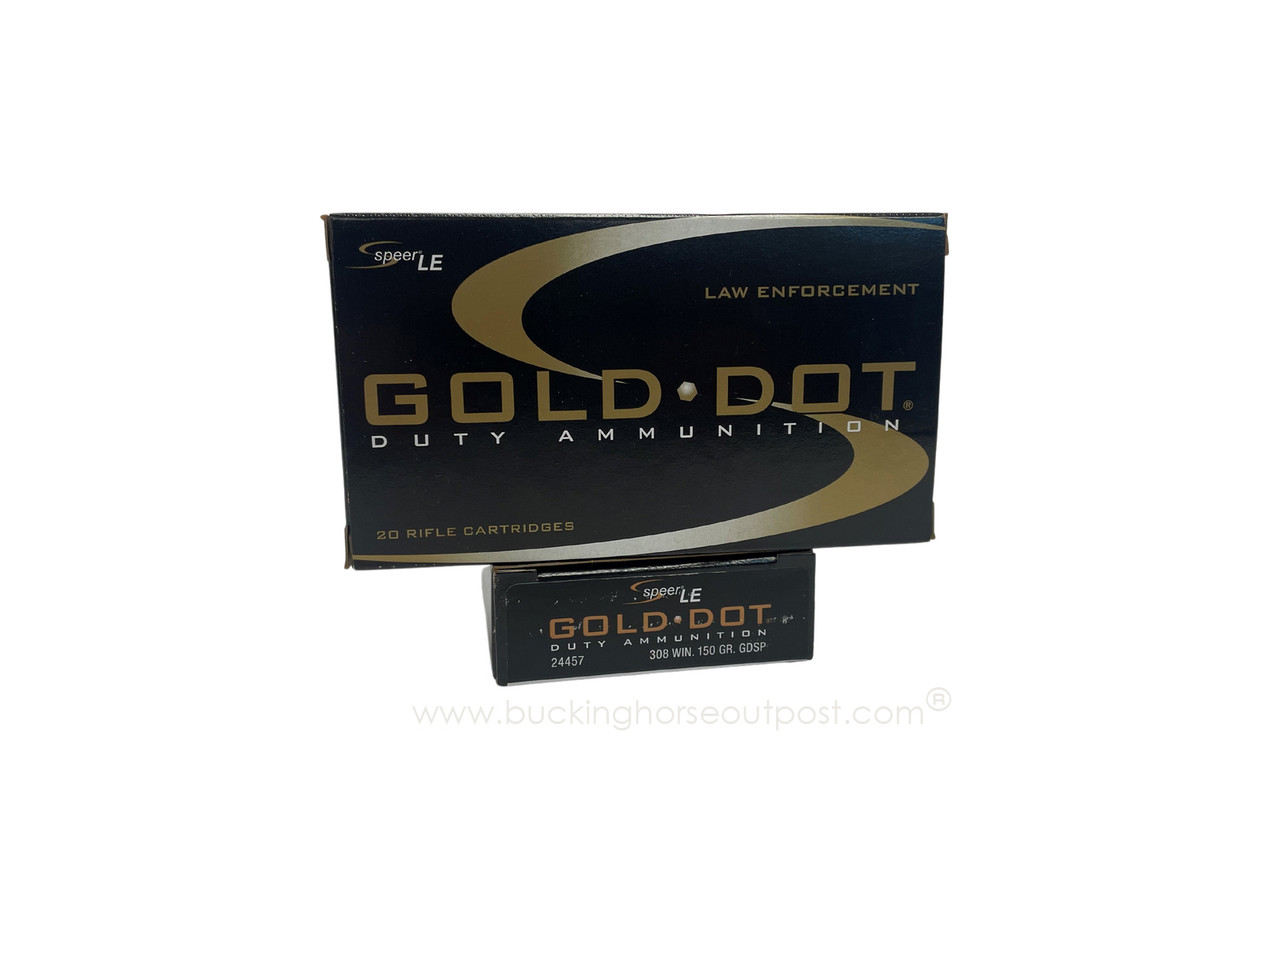 Speer Gold Dot .308 Winchester 150 Grain Soft Point 20rds Per Box (24457)- FREE SHIPPING ON ORDERS OVER $175